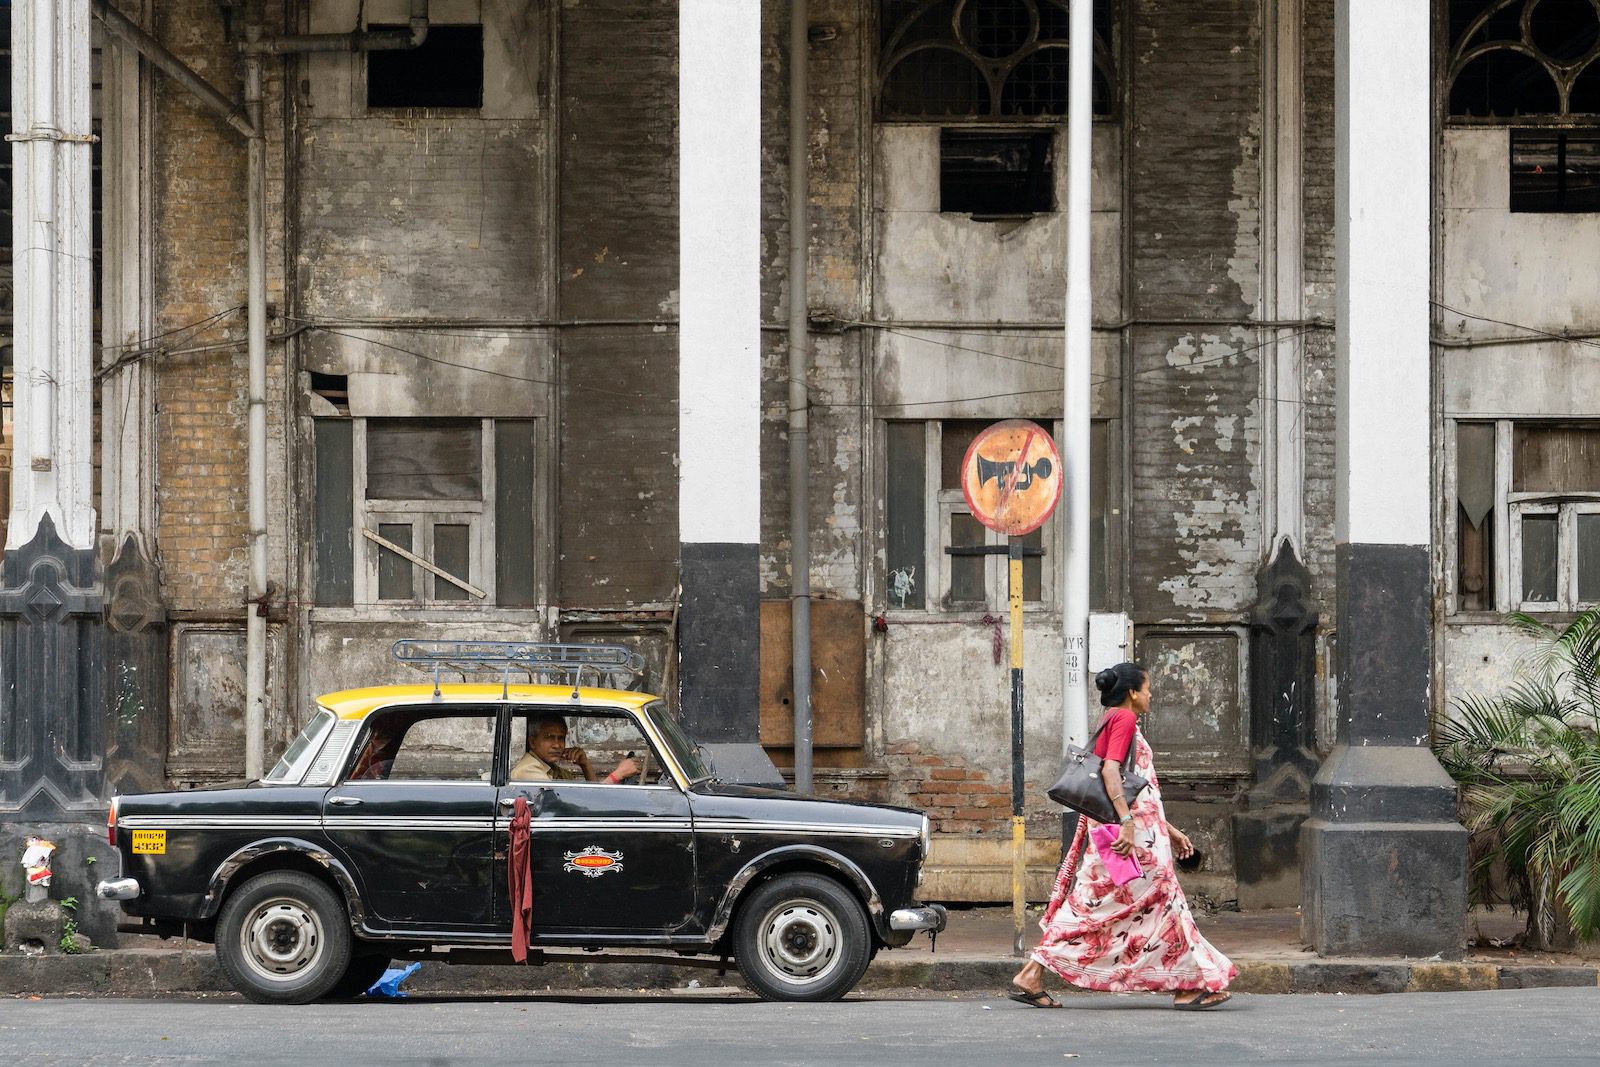 An old building with arched windows stands behind a parked taxi. A person walks past, wearing a patterned saree. A faded no parking sign is visible.